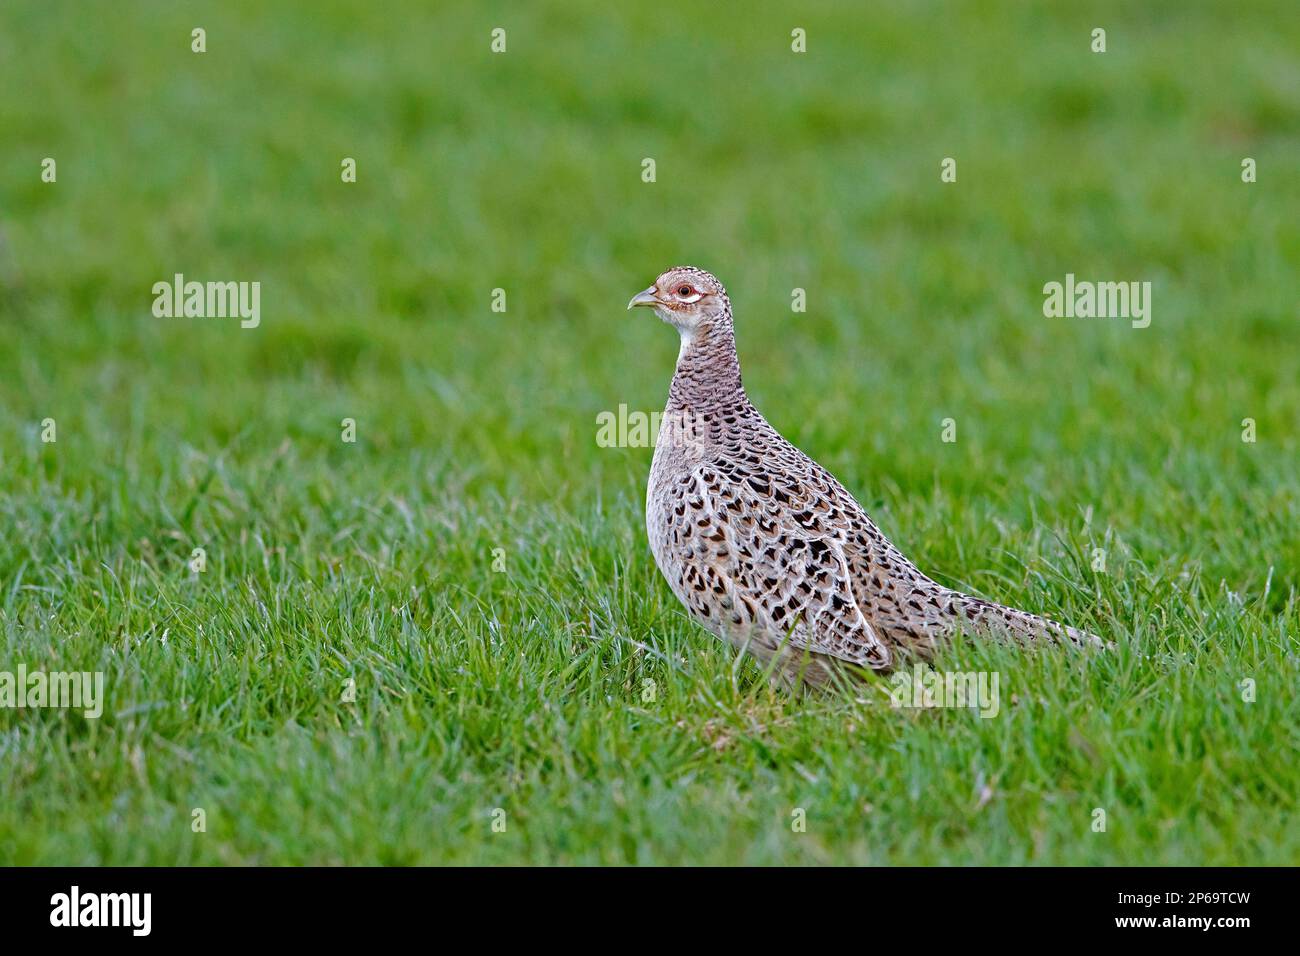 Common pheasant / ring-necked pheasant (Phasianus colchicus) female / hen foraging in meadow / field in spring Stock Photo